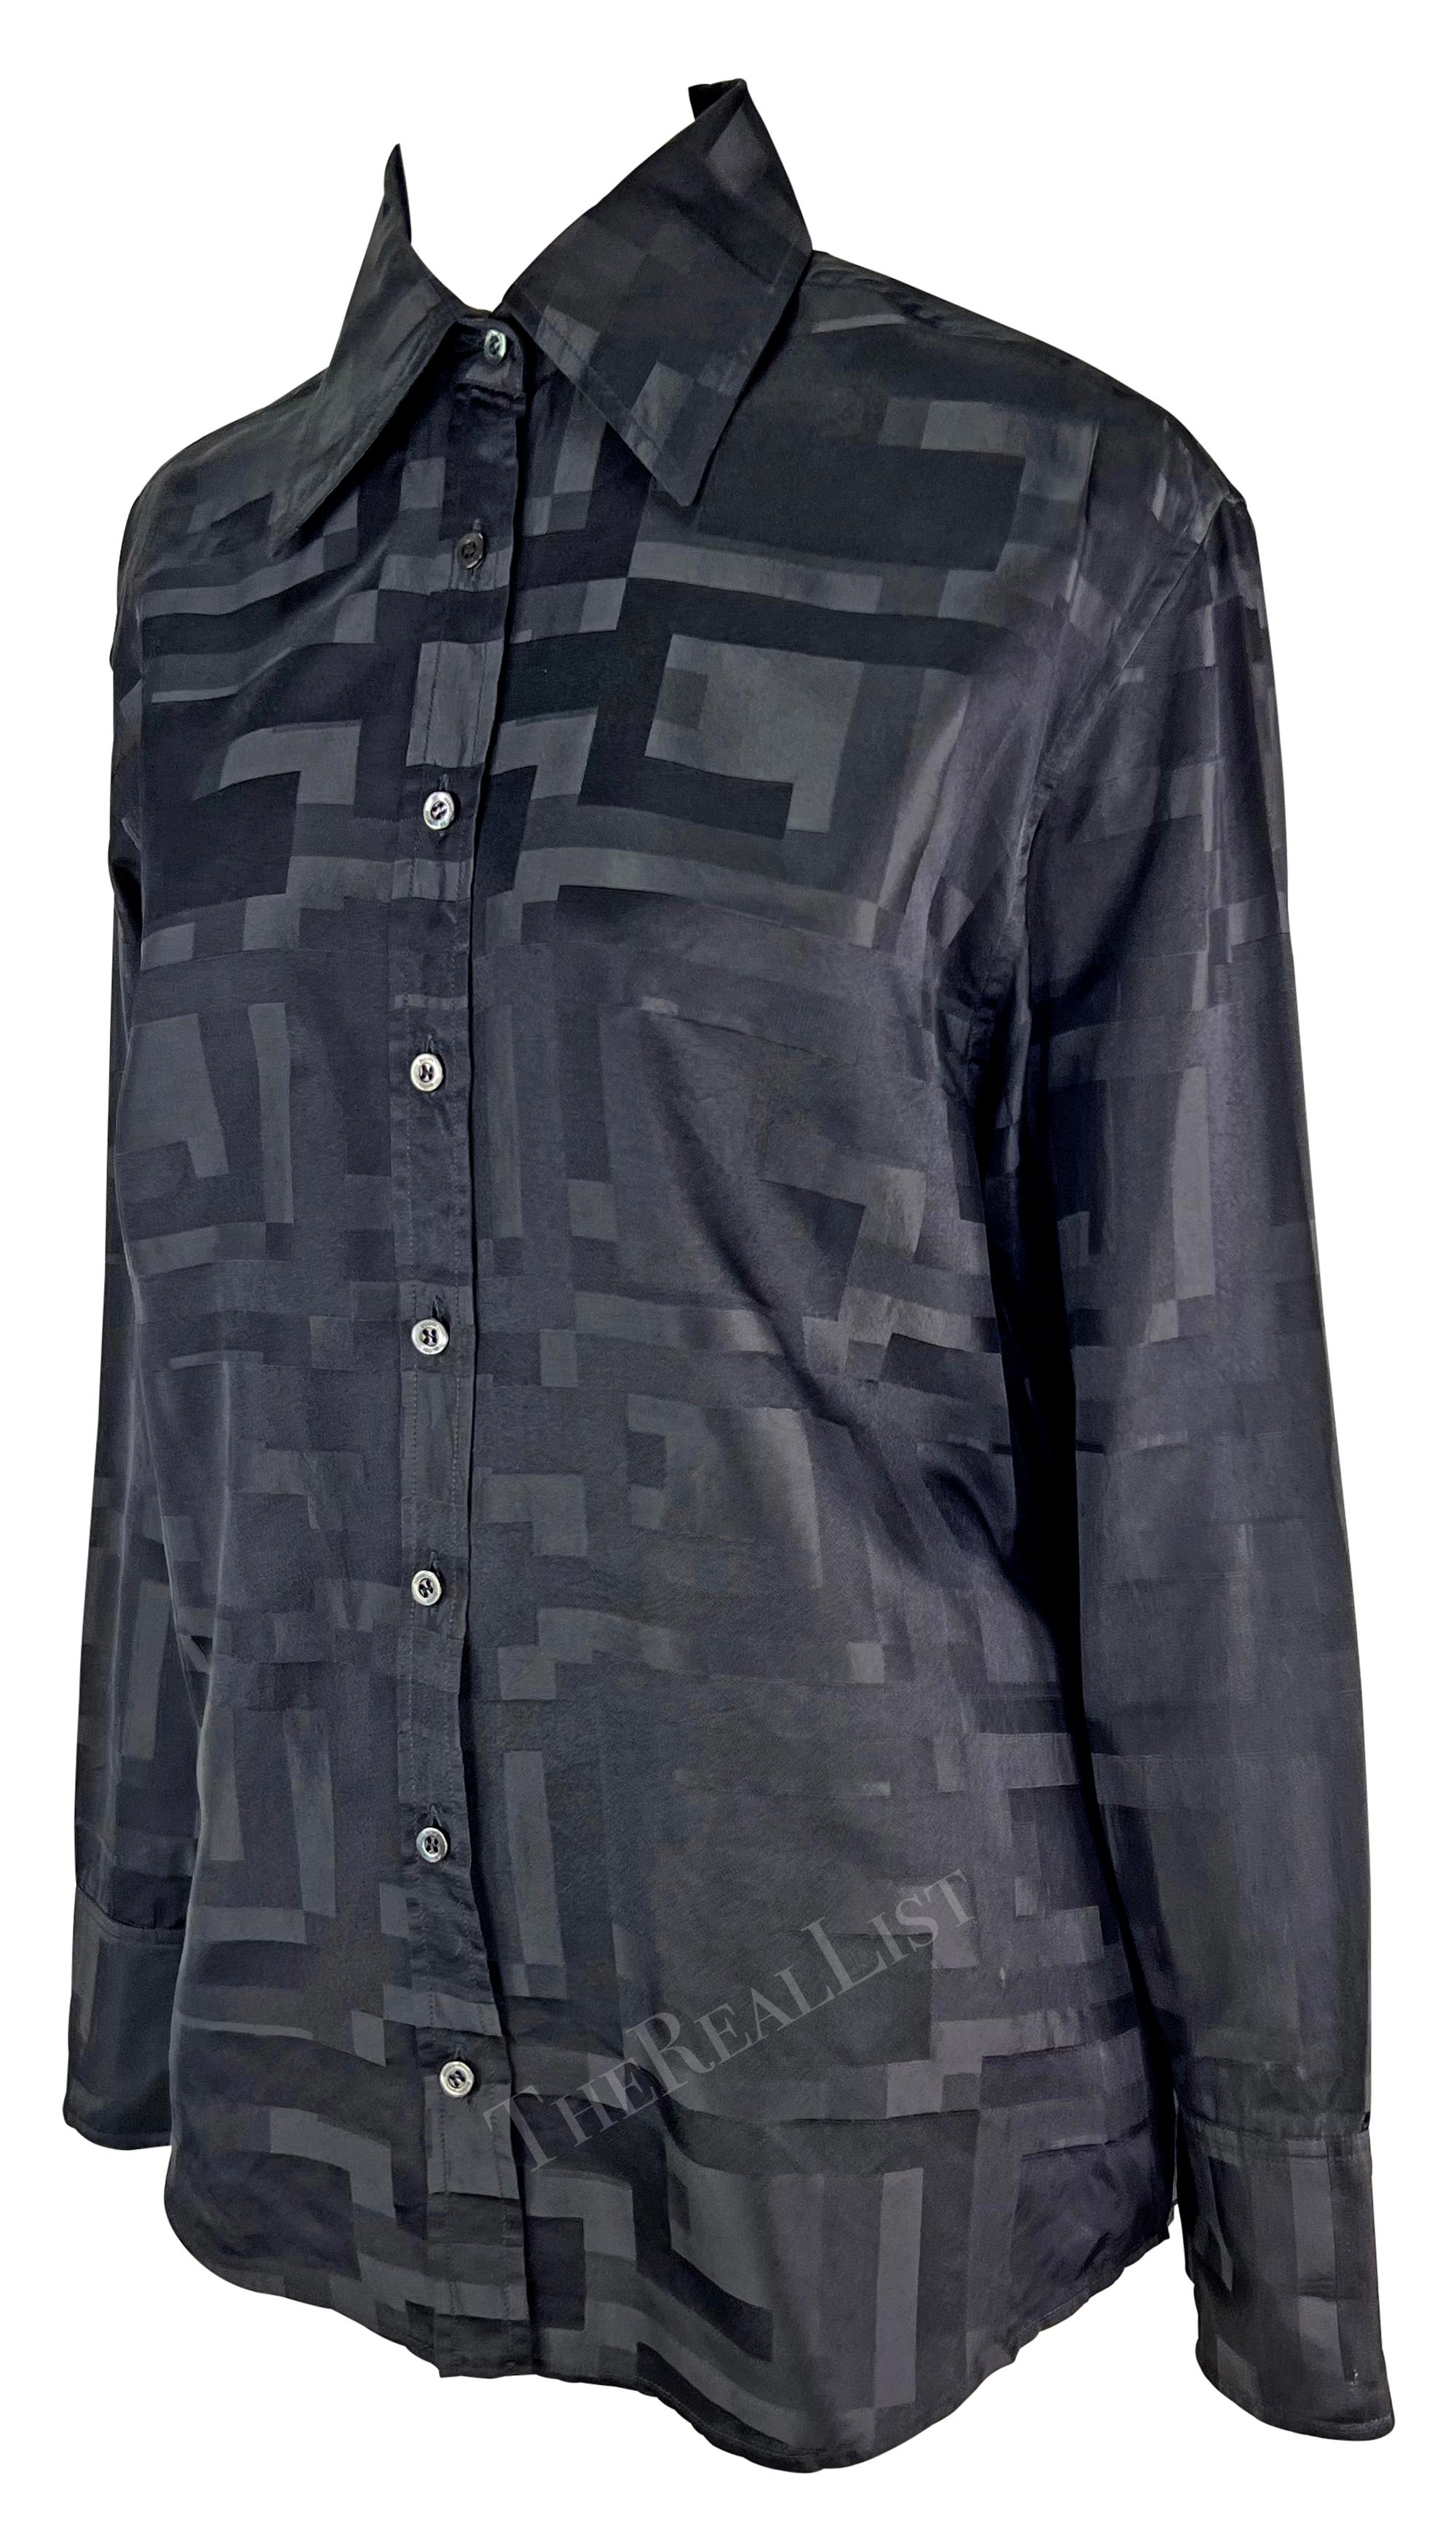 Presenting a black button-up Gucci shirt, designed by Tom Ford. From Gucci's Spring/Summer 1998 collection, this silk blend shirt is covered in an abstract square 'G' pattern and features a collar and front button closure. 

Approximate